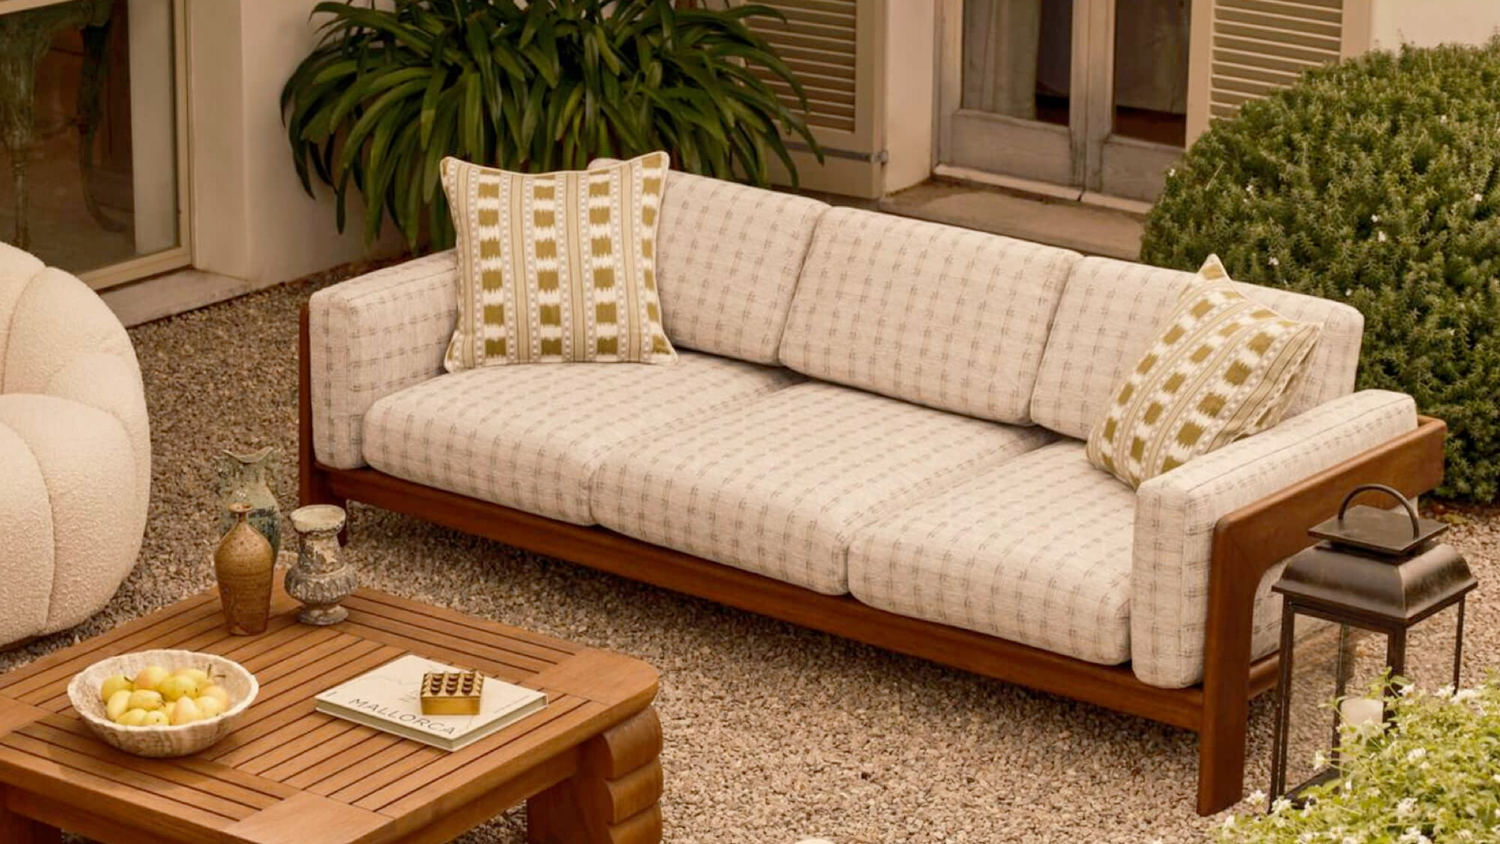 Japandi Outdoor Seating Collection, shown Soho Home Sofa